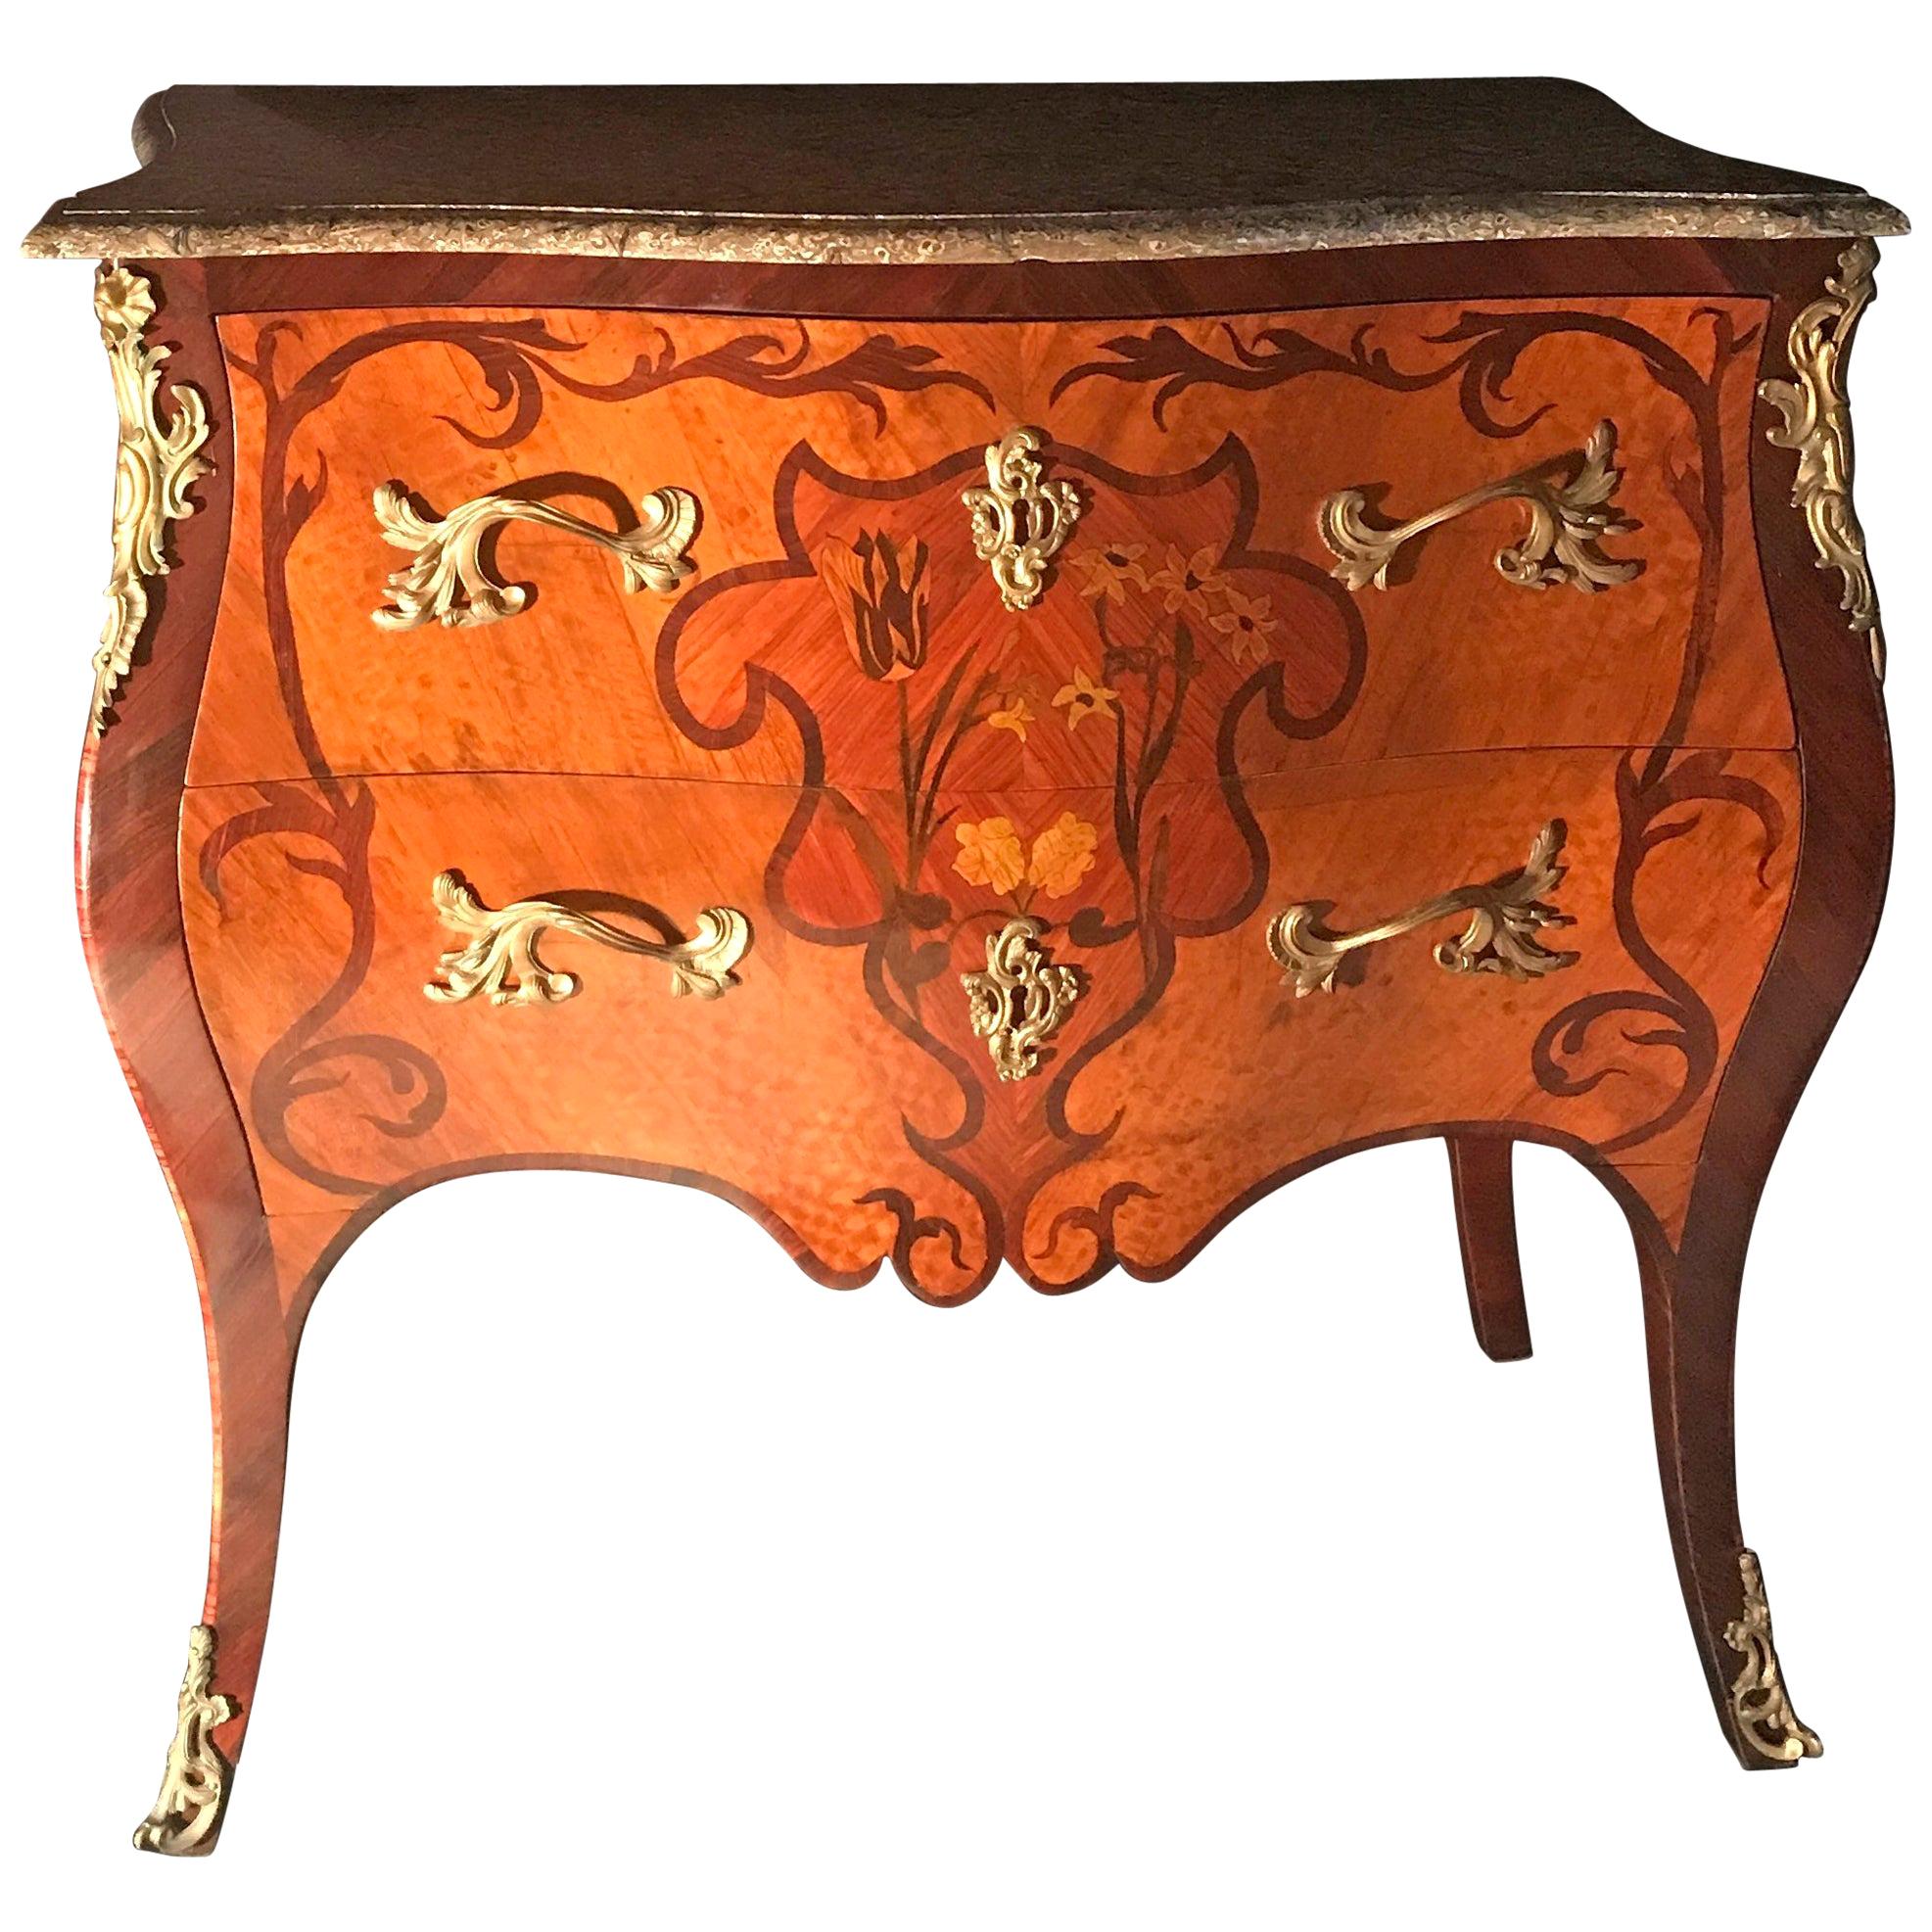 Elegant French 18th Century Commode Louis XV Period For Sale at 1stDibs